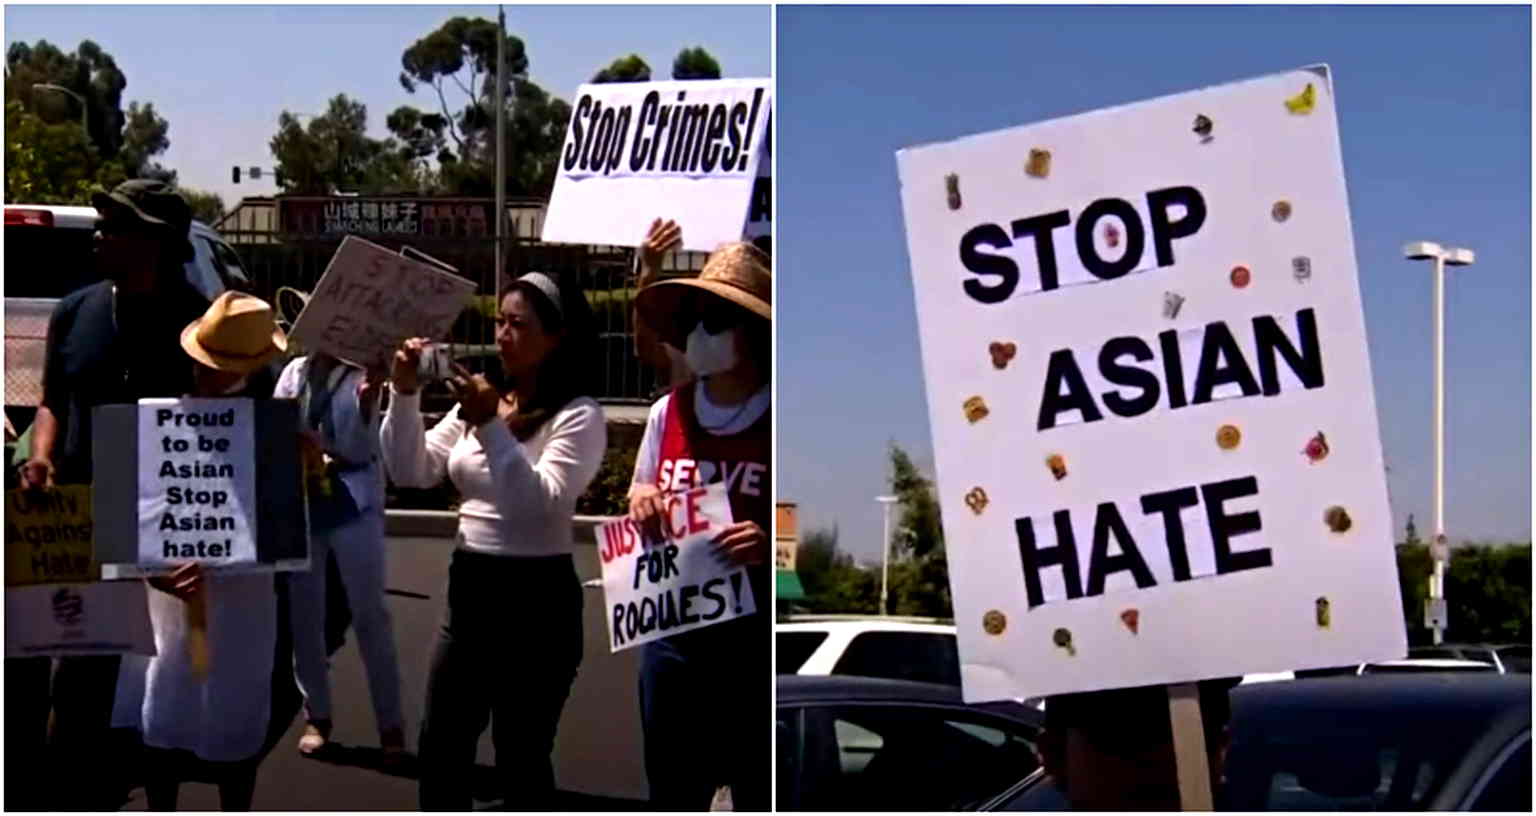 California soft-launches hate crimes resource line